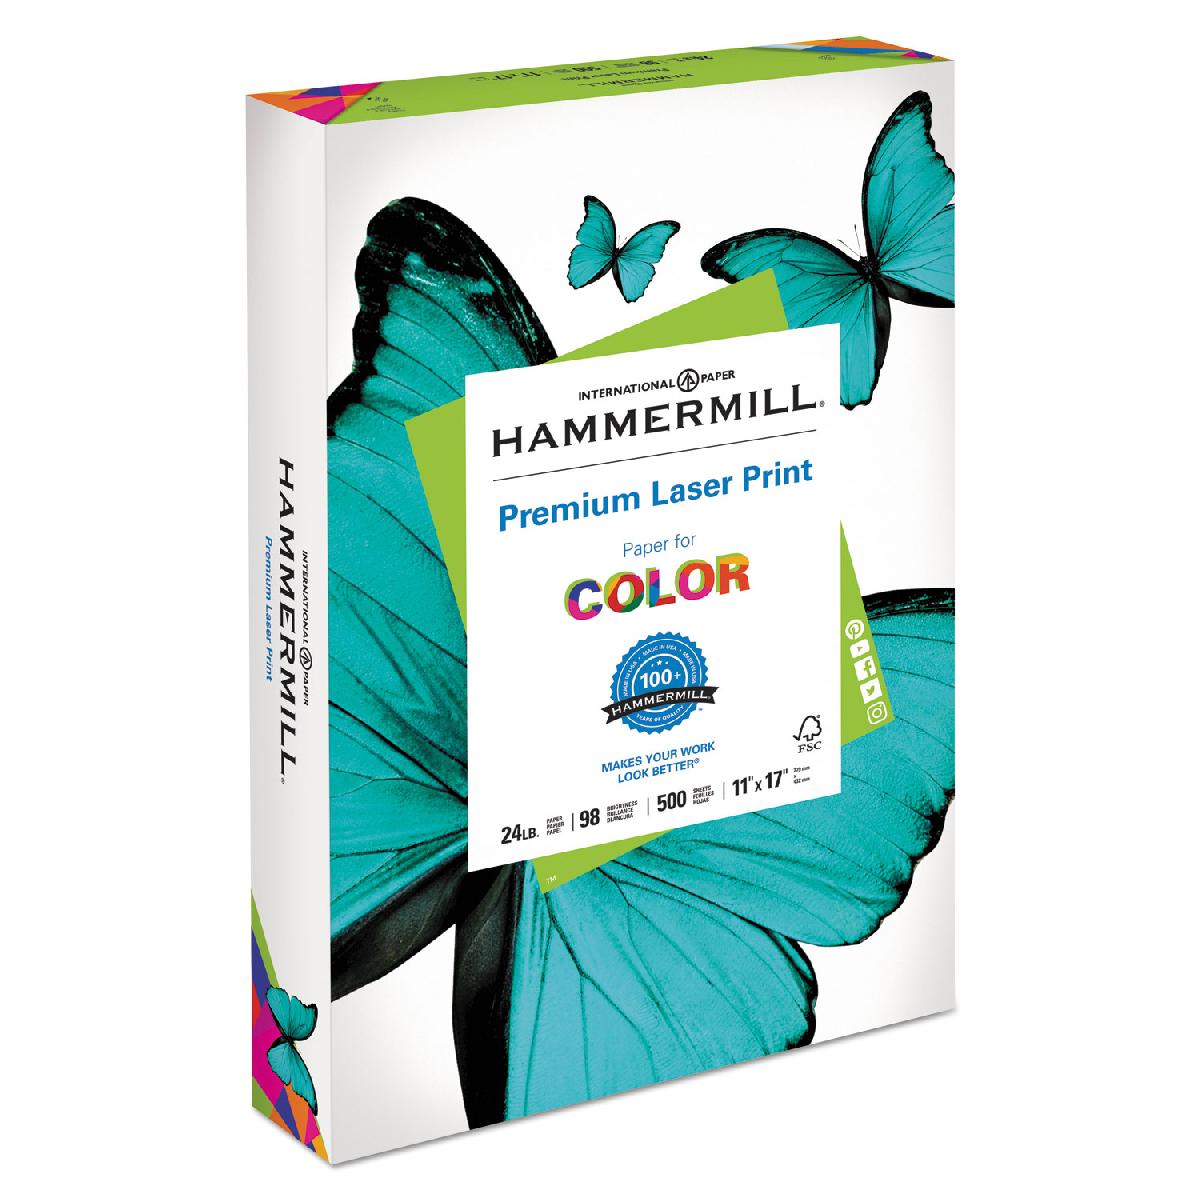 Hammermill® Laser Print Radiant White 32-80 lb. Ultra Smooth Premium Copy Paper 8.5x11 in. 500 Sheets per Ream